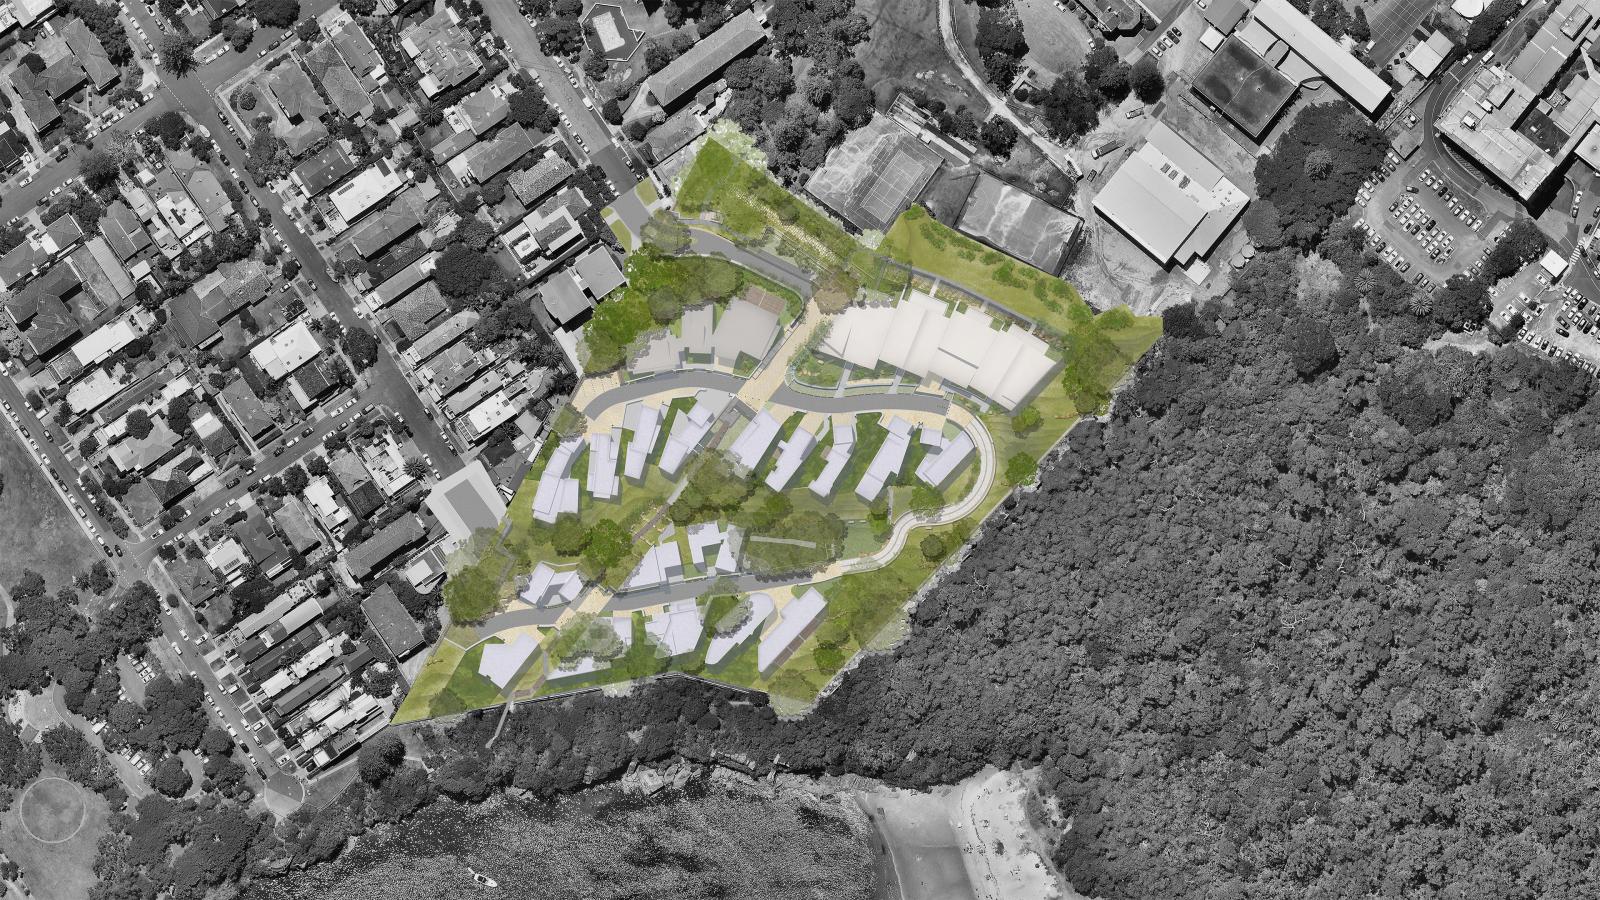 Aerial view of Spring Cove, a residential area with a planned development highlighted in the center. The development includes multiple buildings surrounded by green spaces with a main road looping through. Dense forest borders the area to the bottom and right, providing a scenic backdrop reminiscent of Manly.